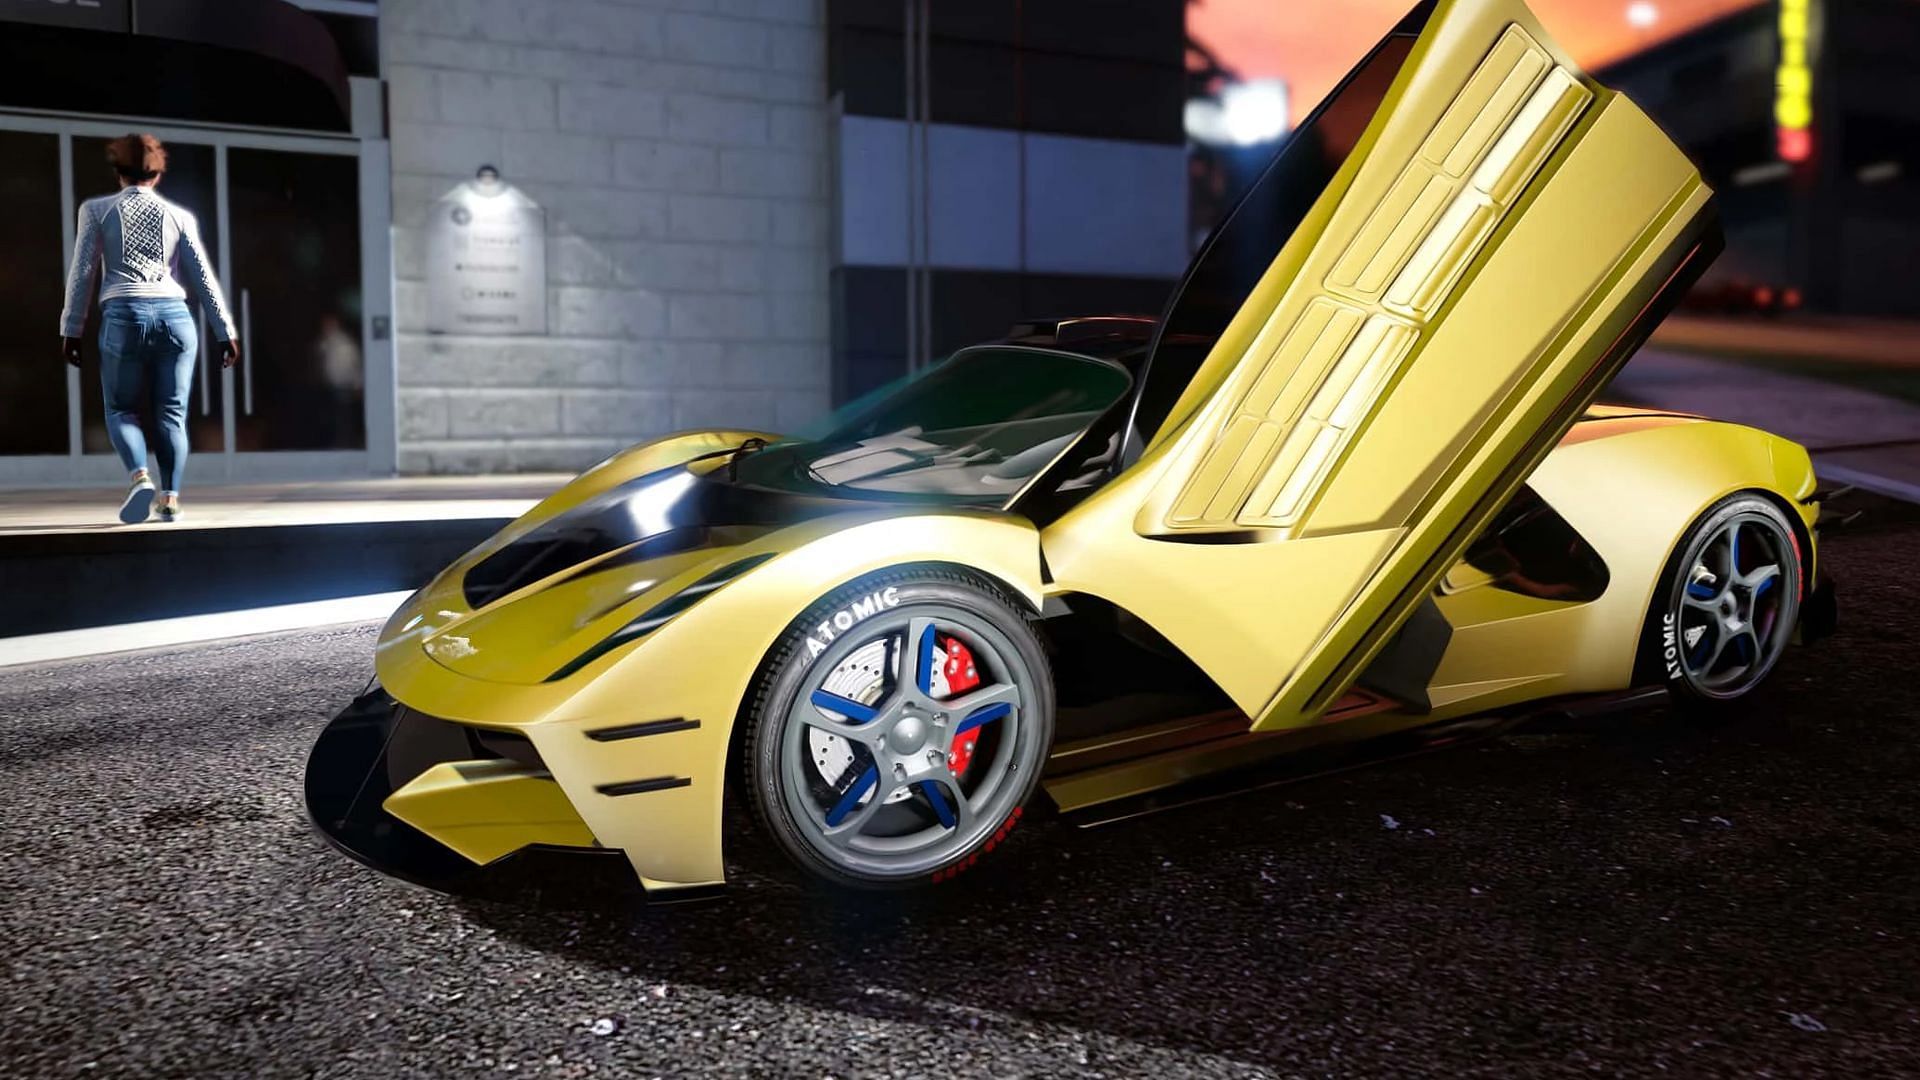 The Ocelot Virtue was released in The Last Dose update